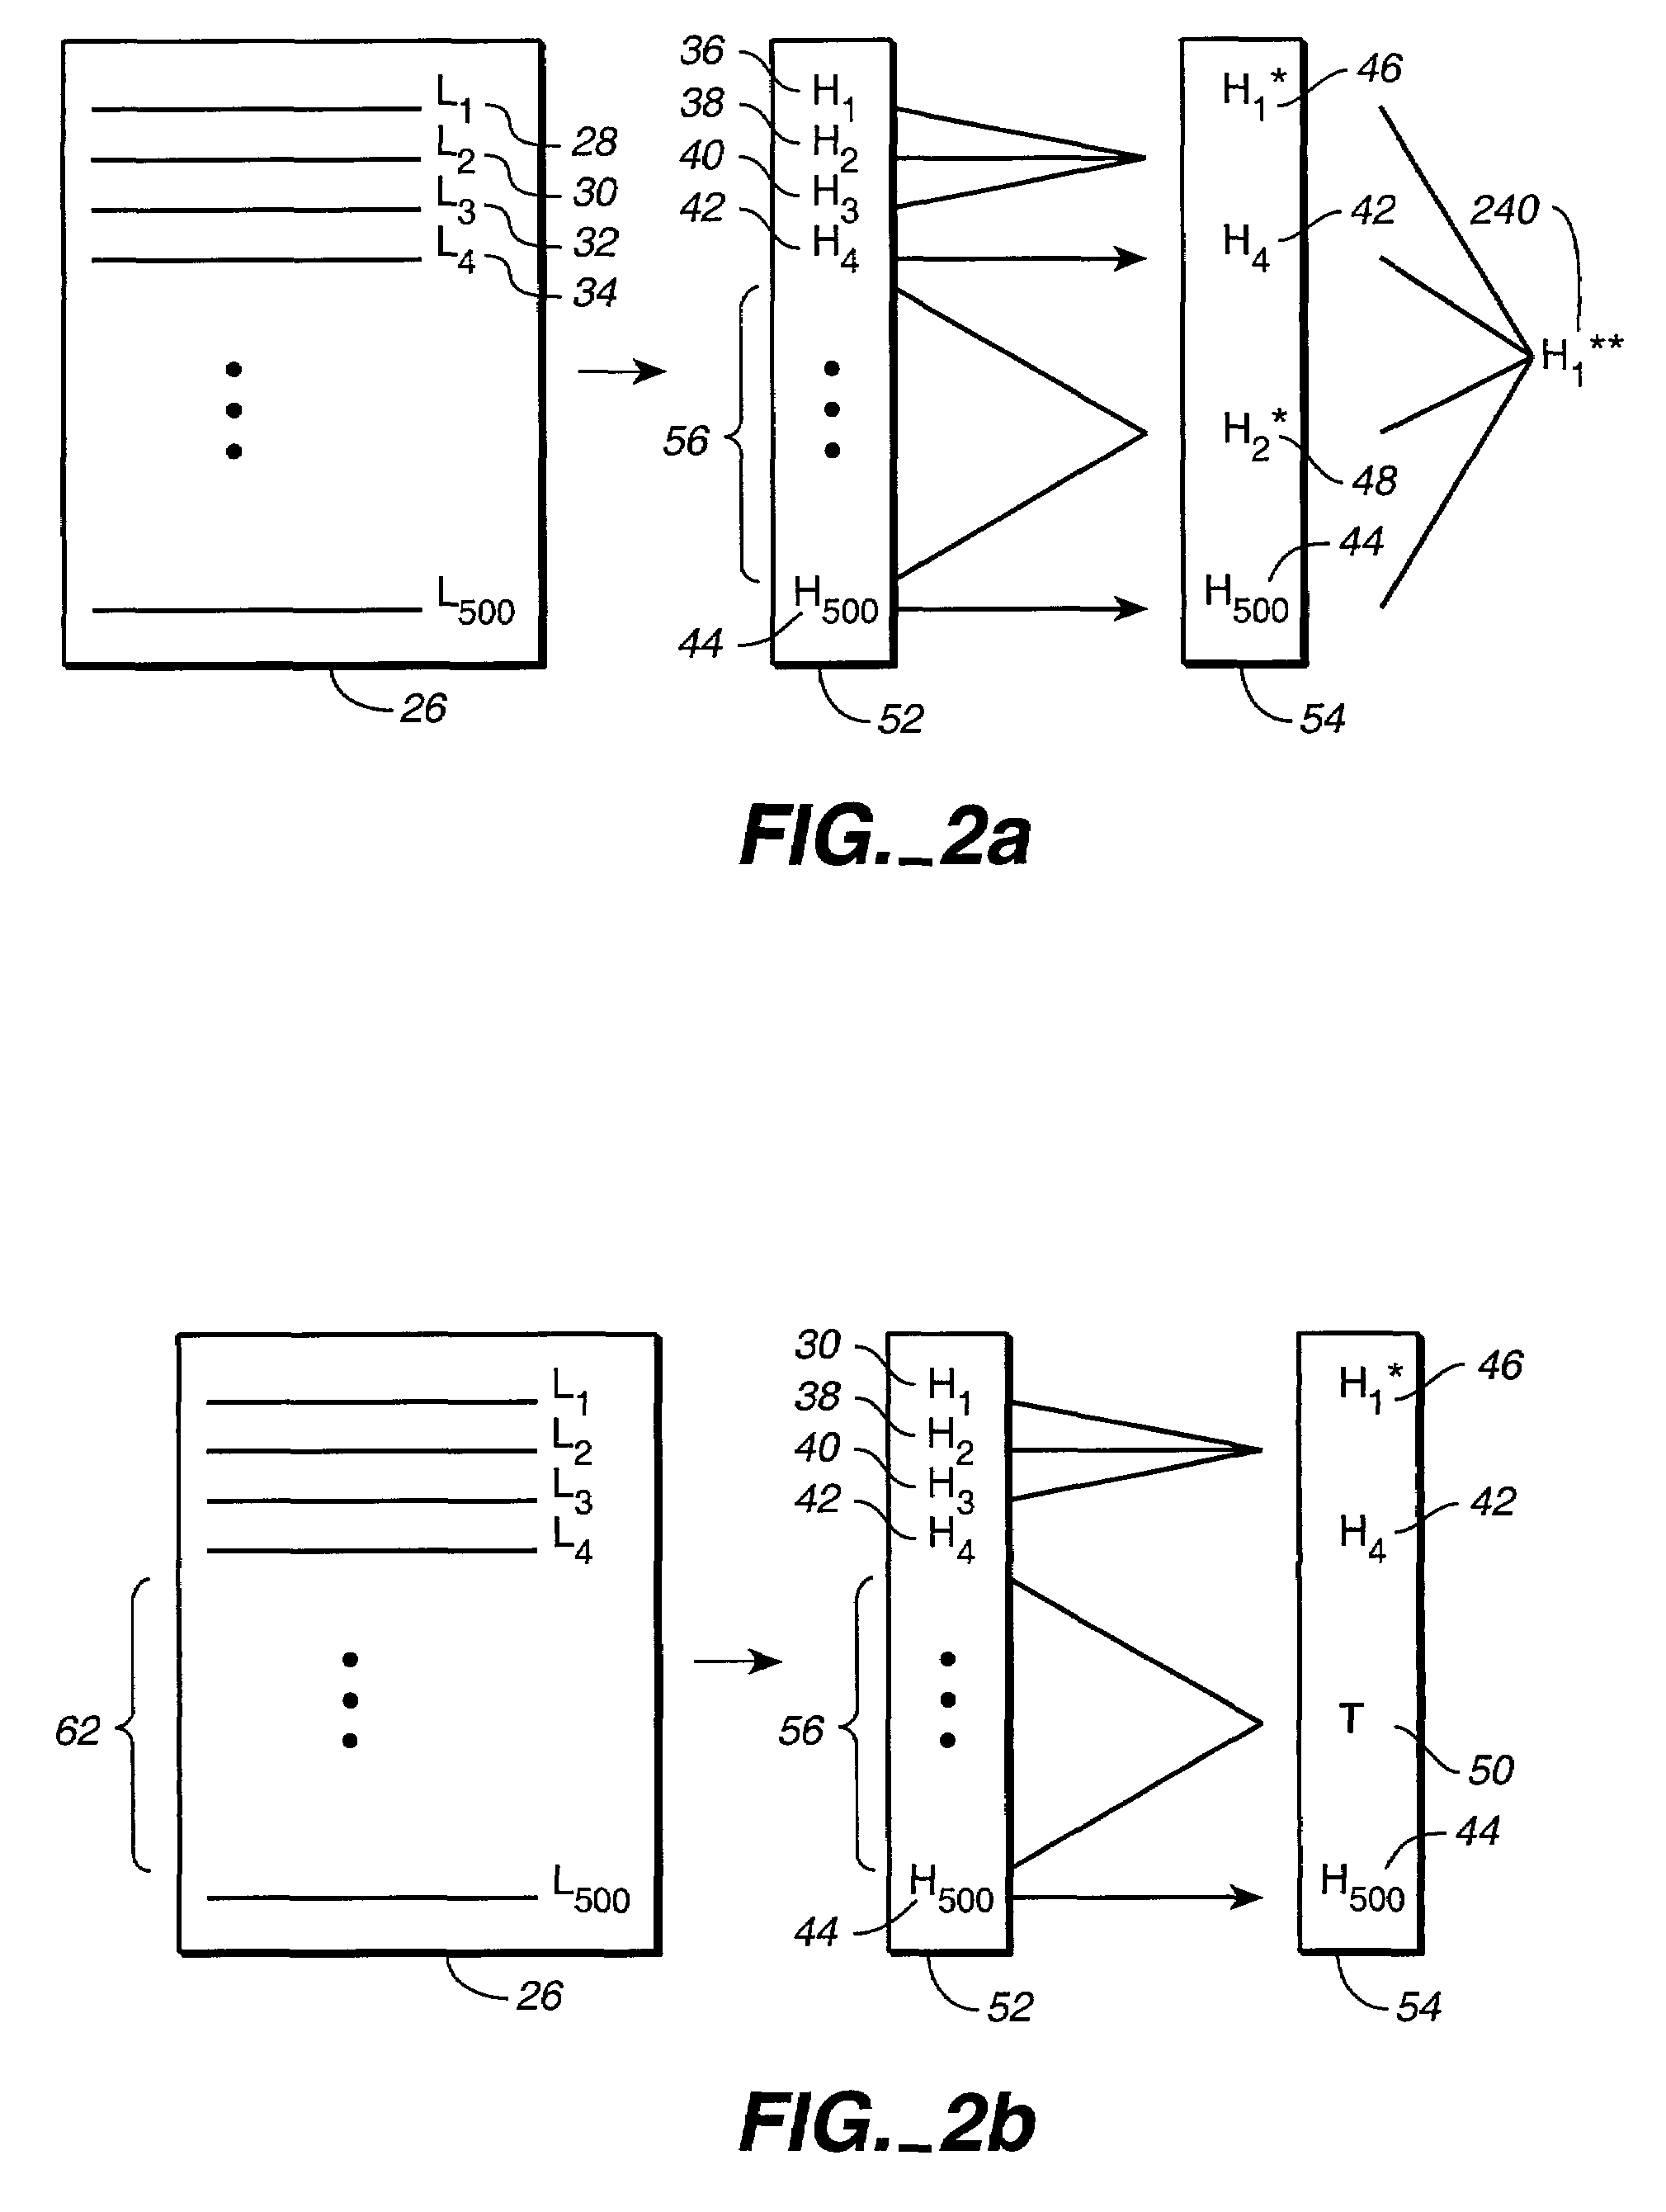 Method and system for reducing network latency in data communication